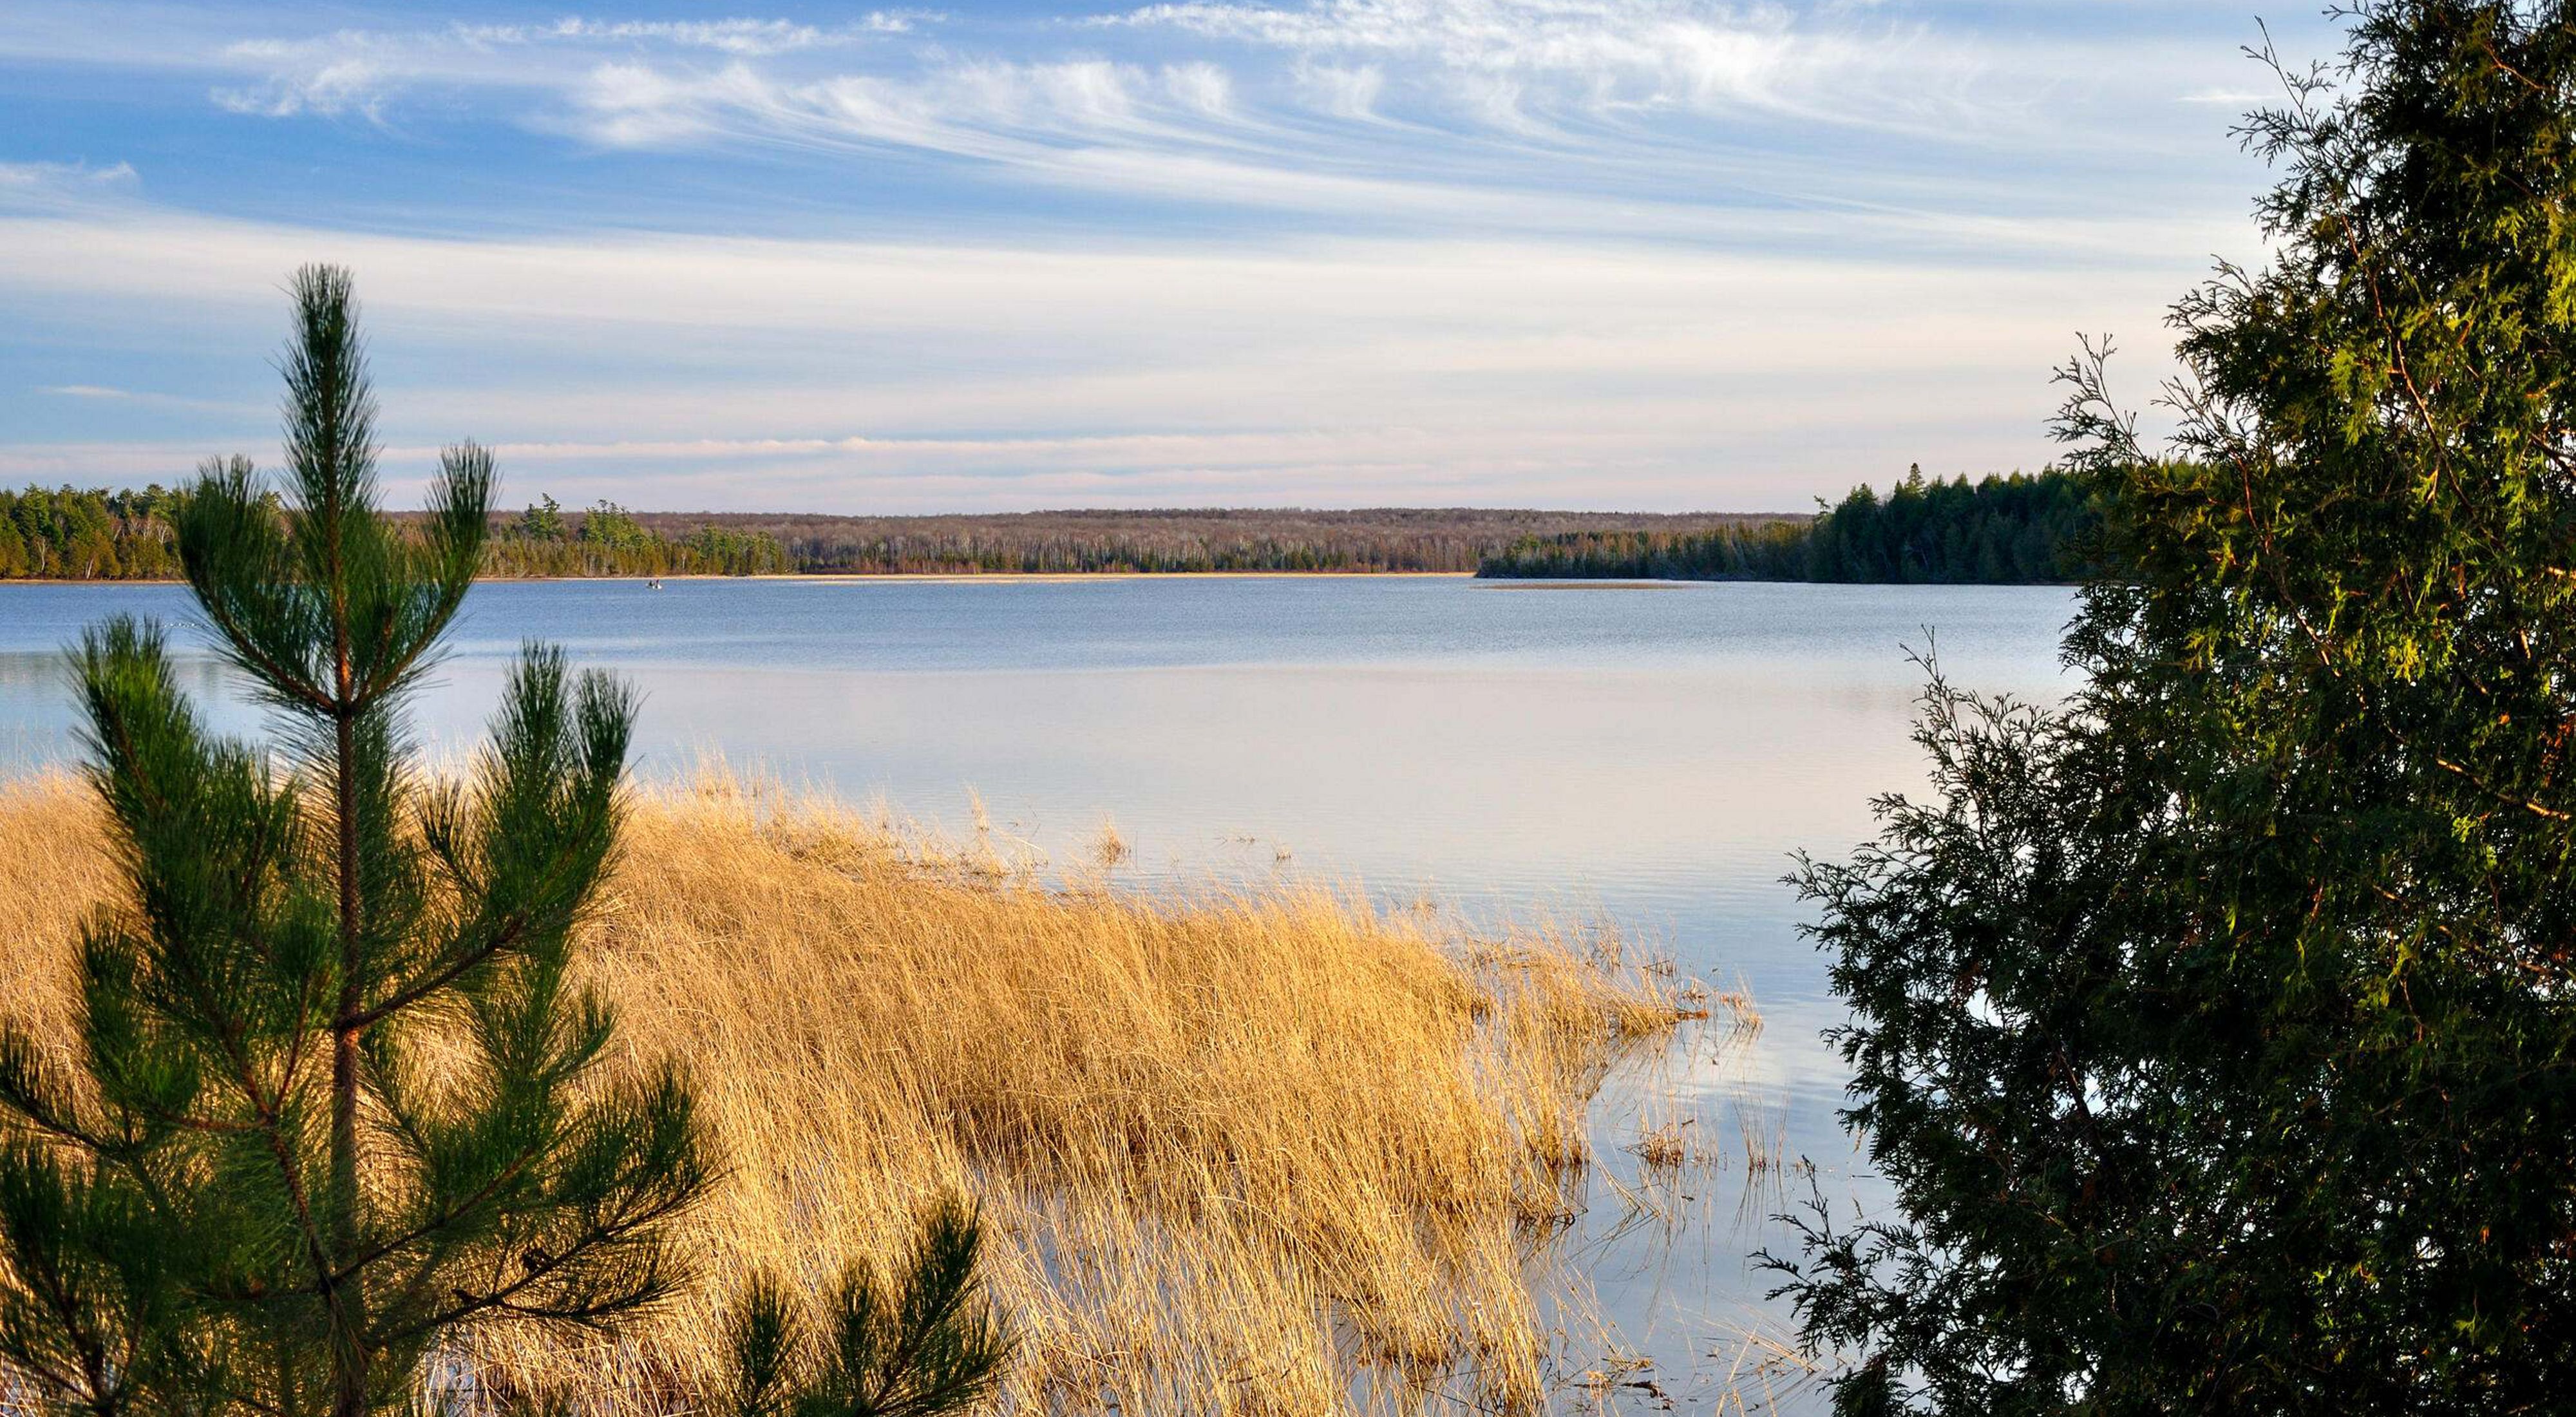 Evergreen trees and autumnal grasses on the shore of a blue lake under a cloudy blue sky. 